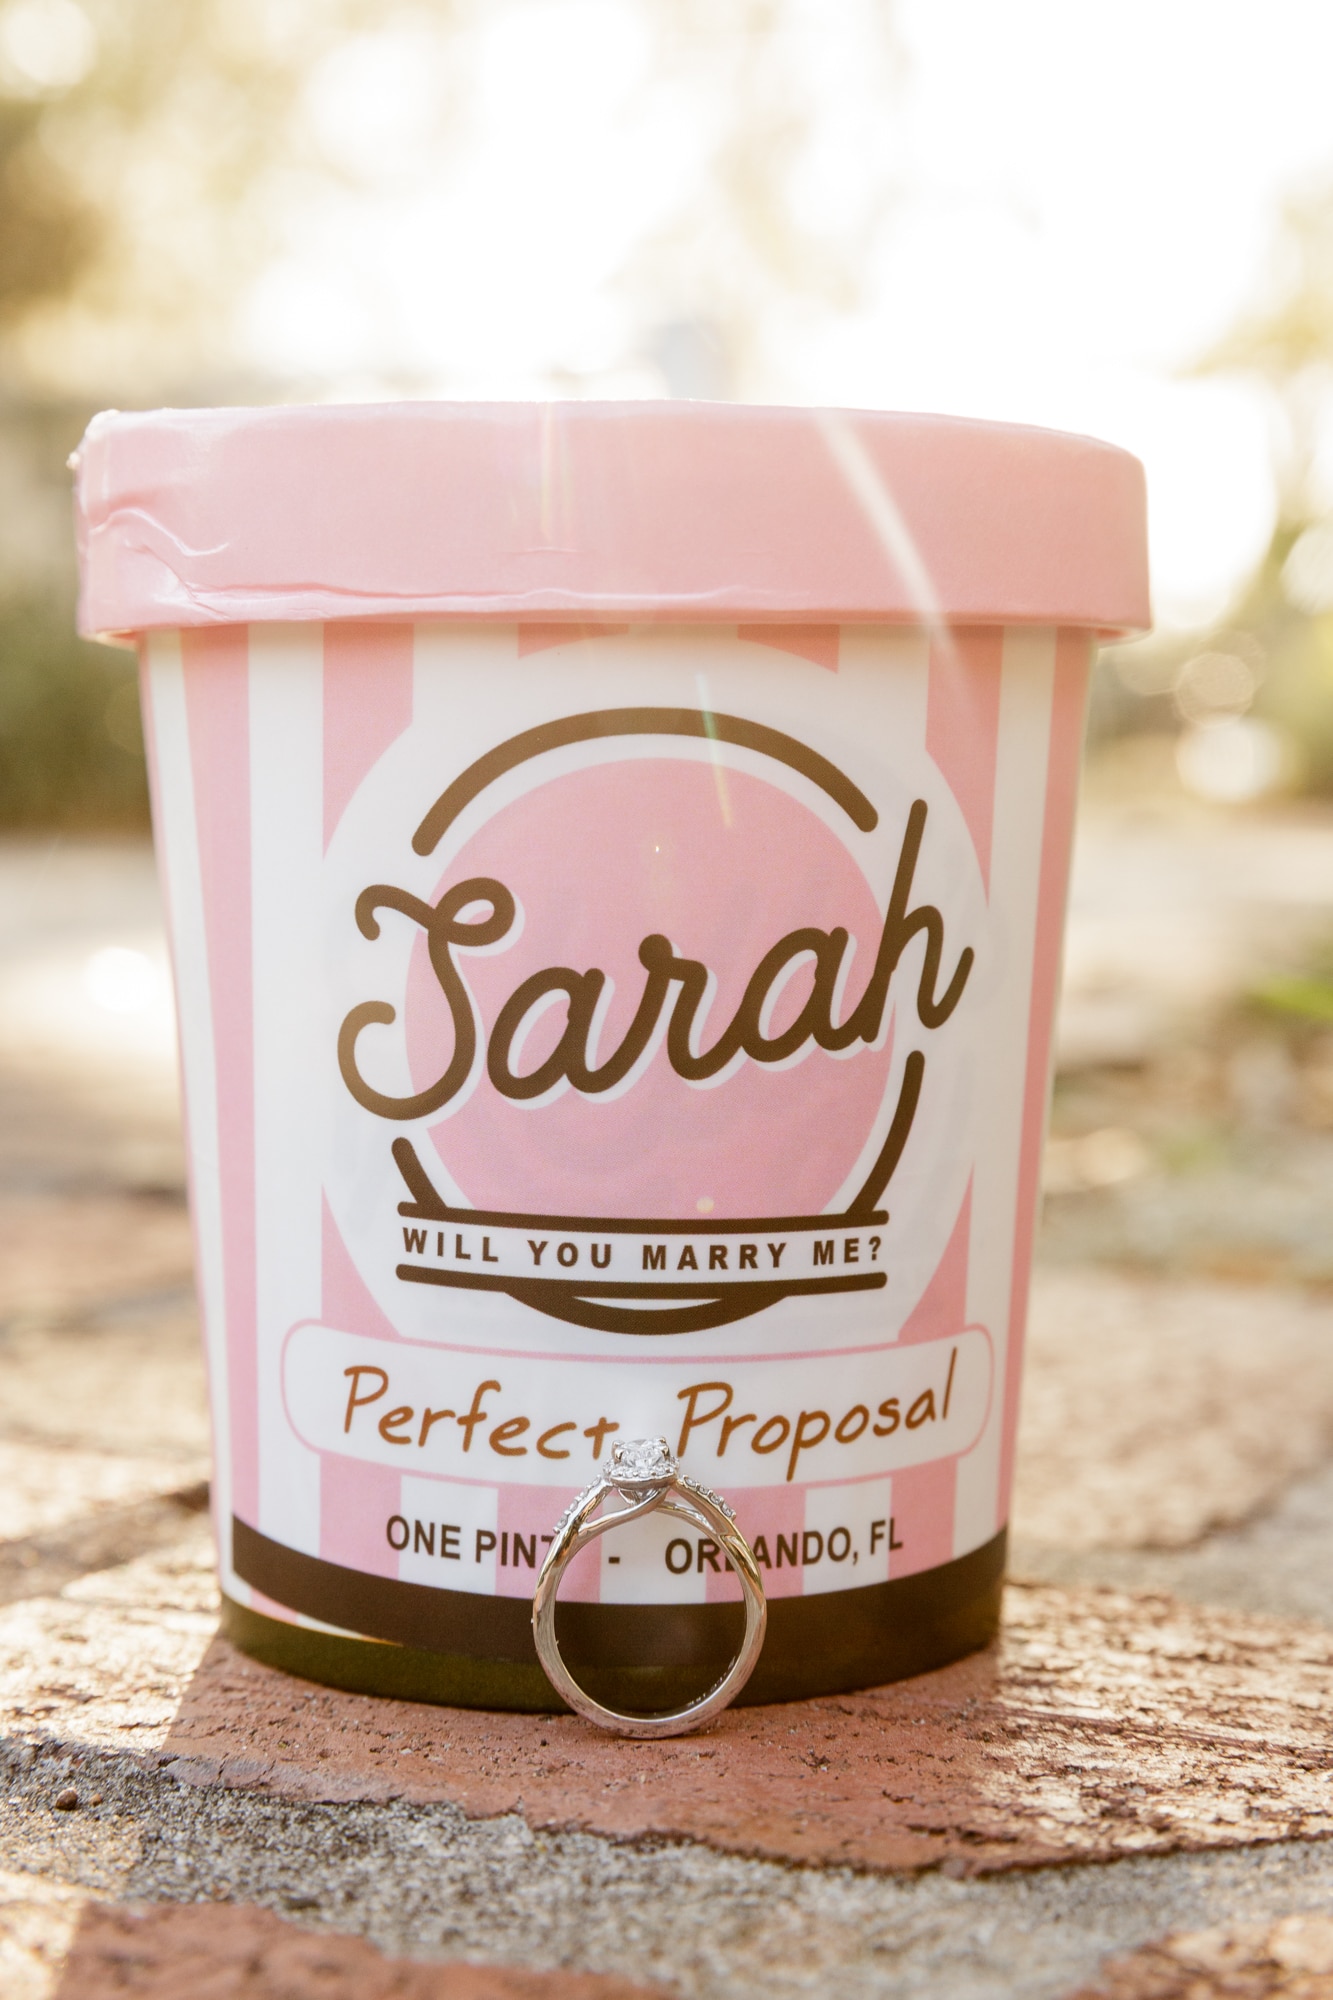 custom designed ice cream container with kelly's ice cream marriage proposal on it with engagement ring sitting in front of it on the brick paved ground